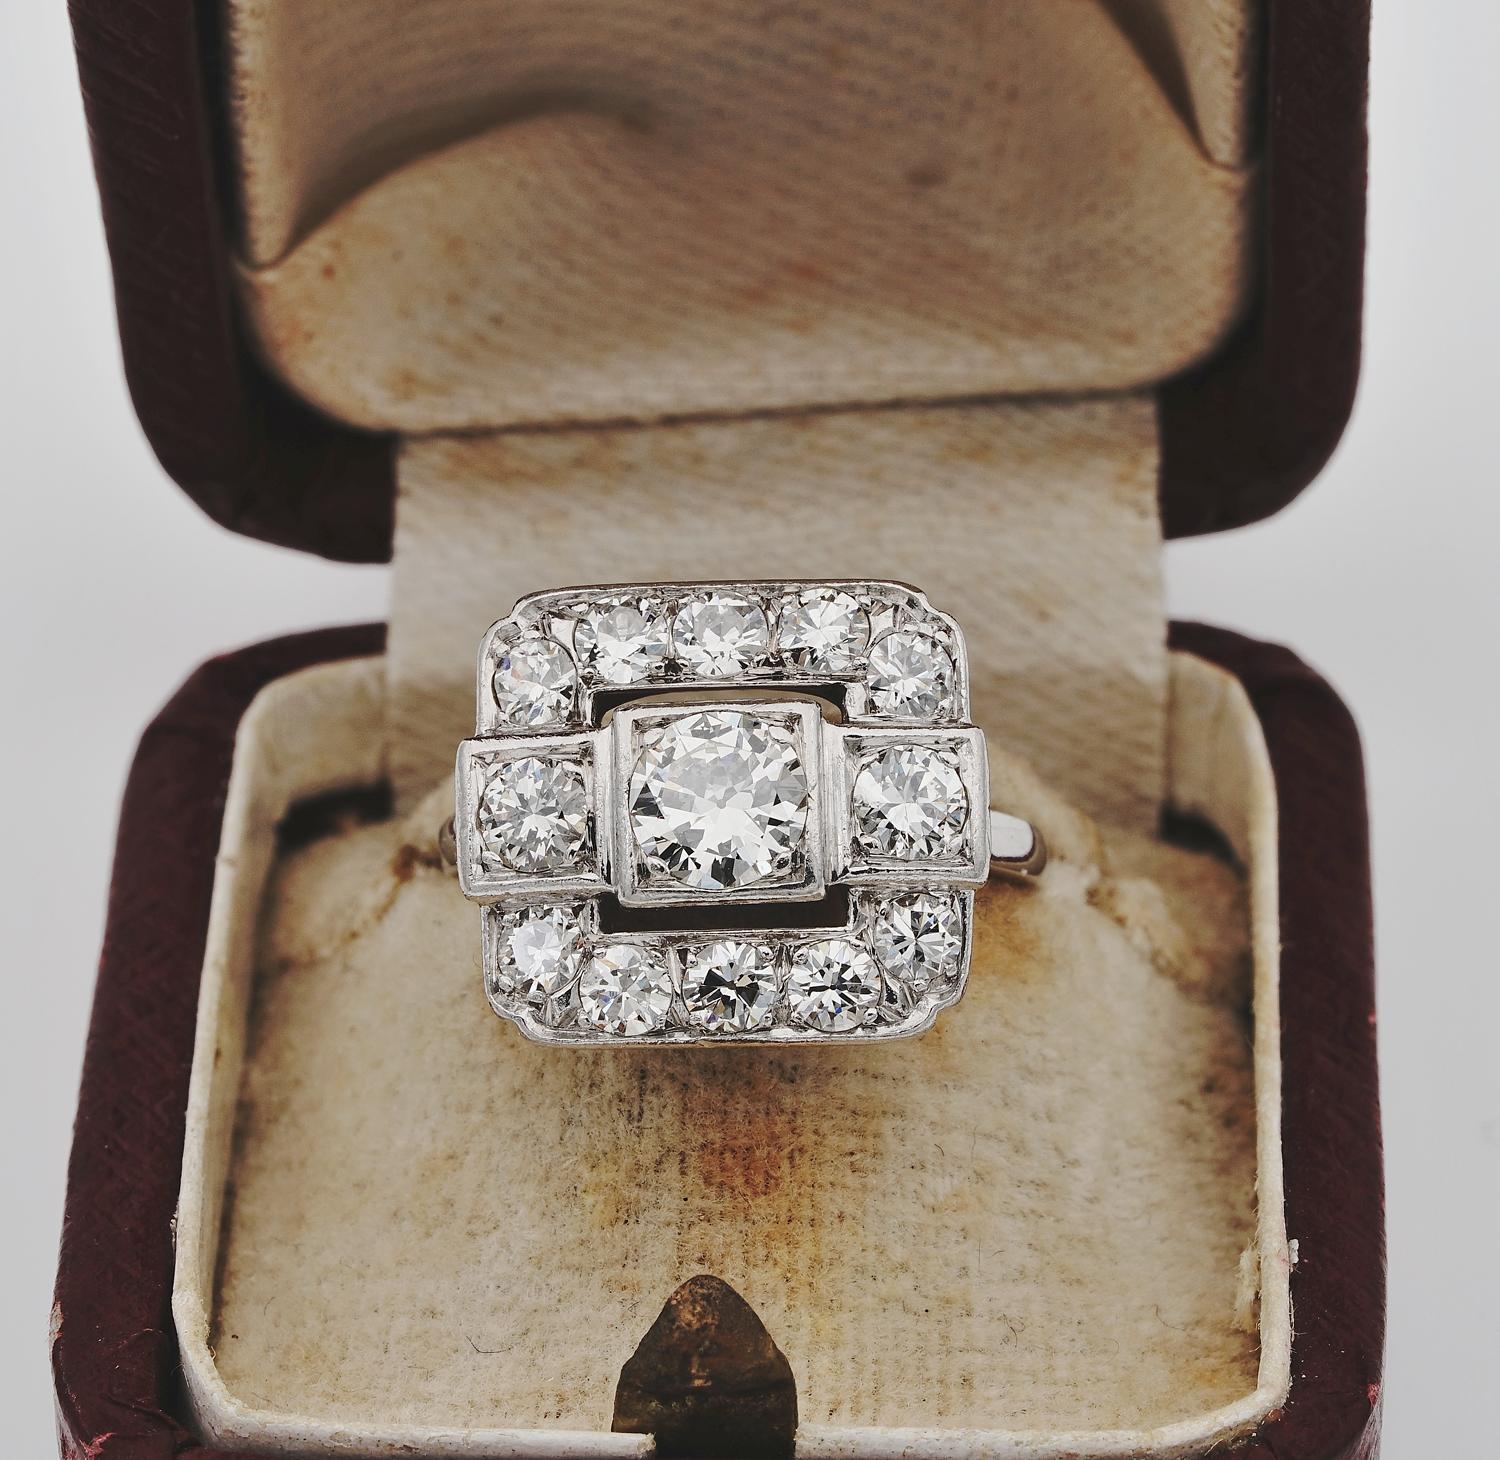 Jewelry Art

Authentic Art Deco Engagement rings provide the allure which has largely disappeared of buying a jewel with truly individual design, significance and art expression
This distinctive Art Deco delight, hand fabricated in PLATINUM during